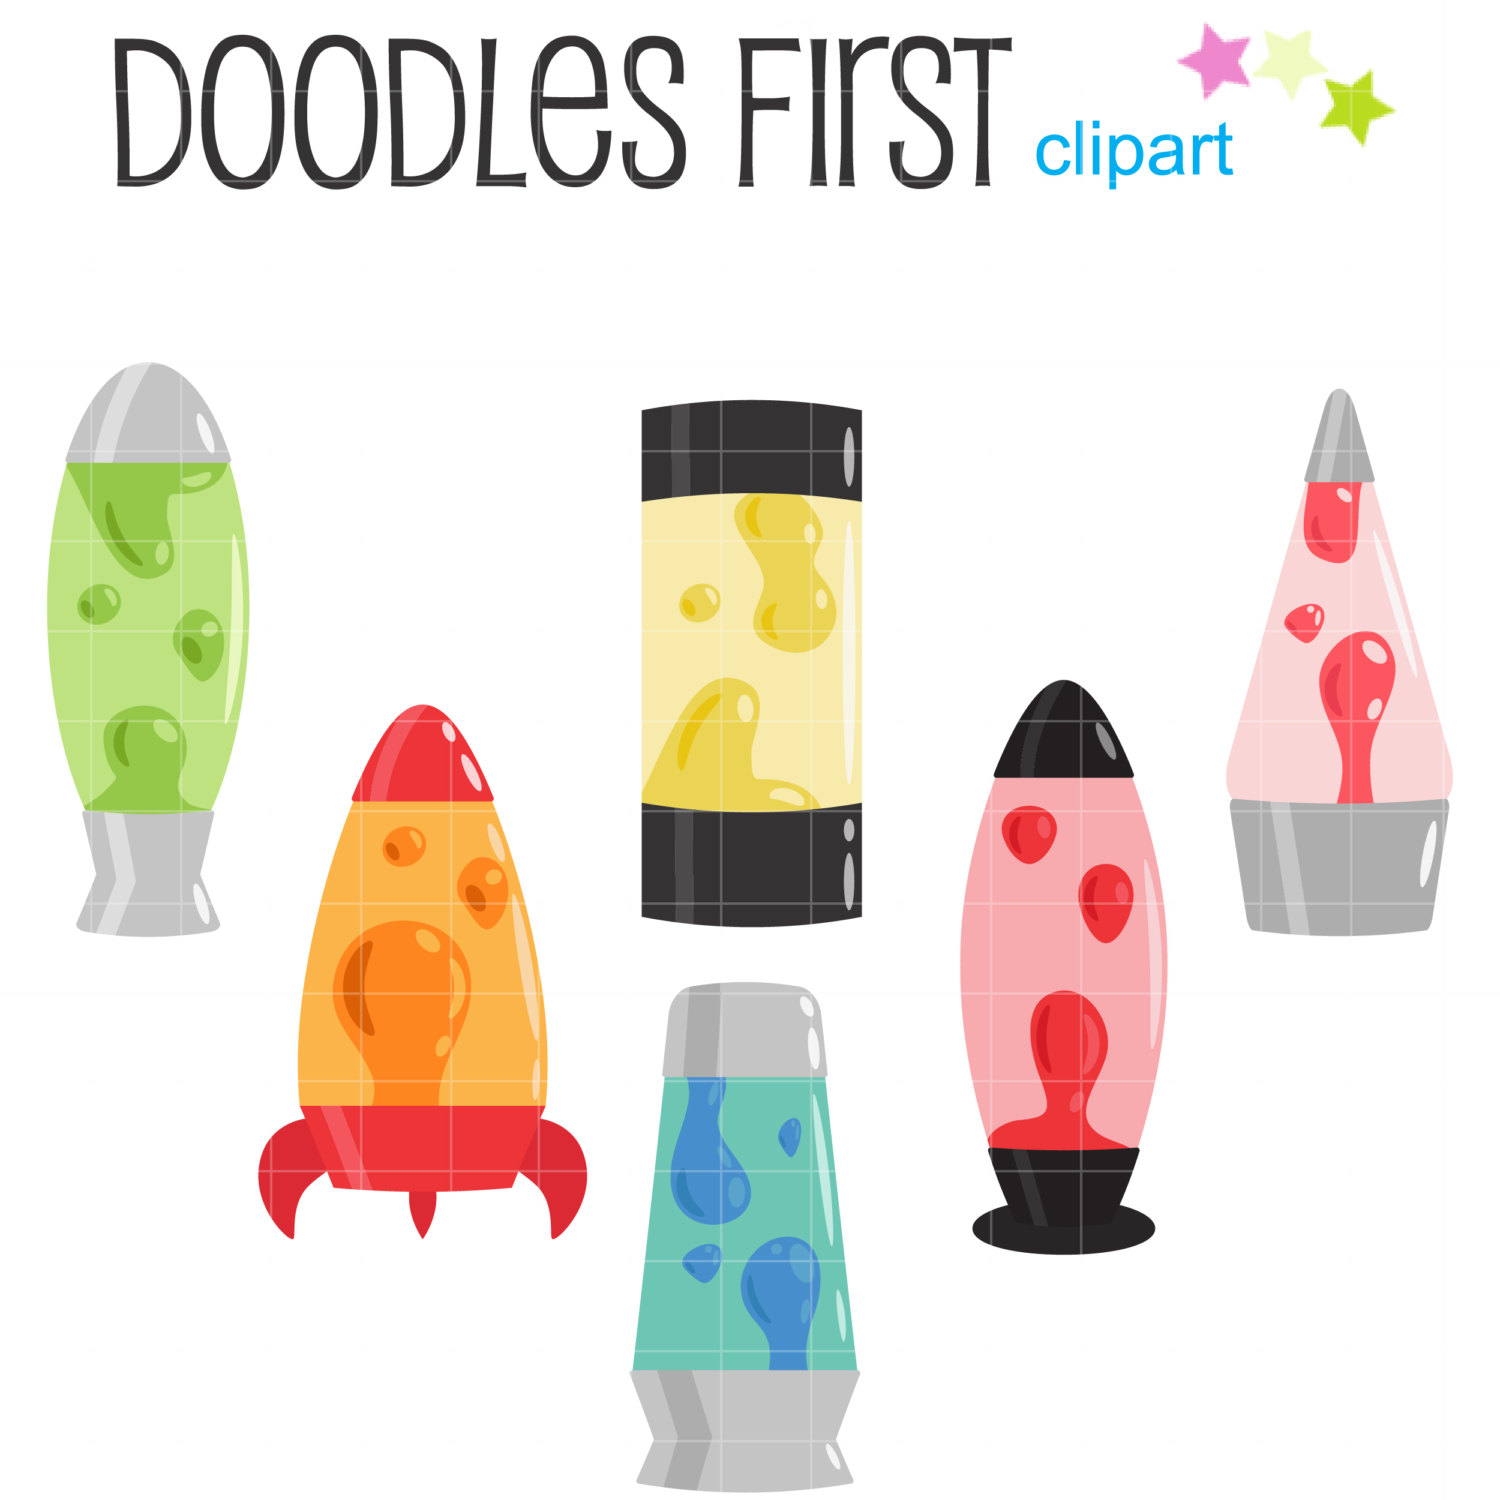 Groovy Lava Lamps Day Digital Clip Art For By Doodlesfirst On Etsy